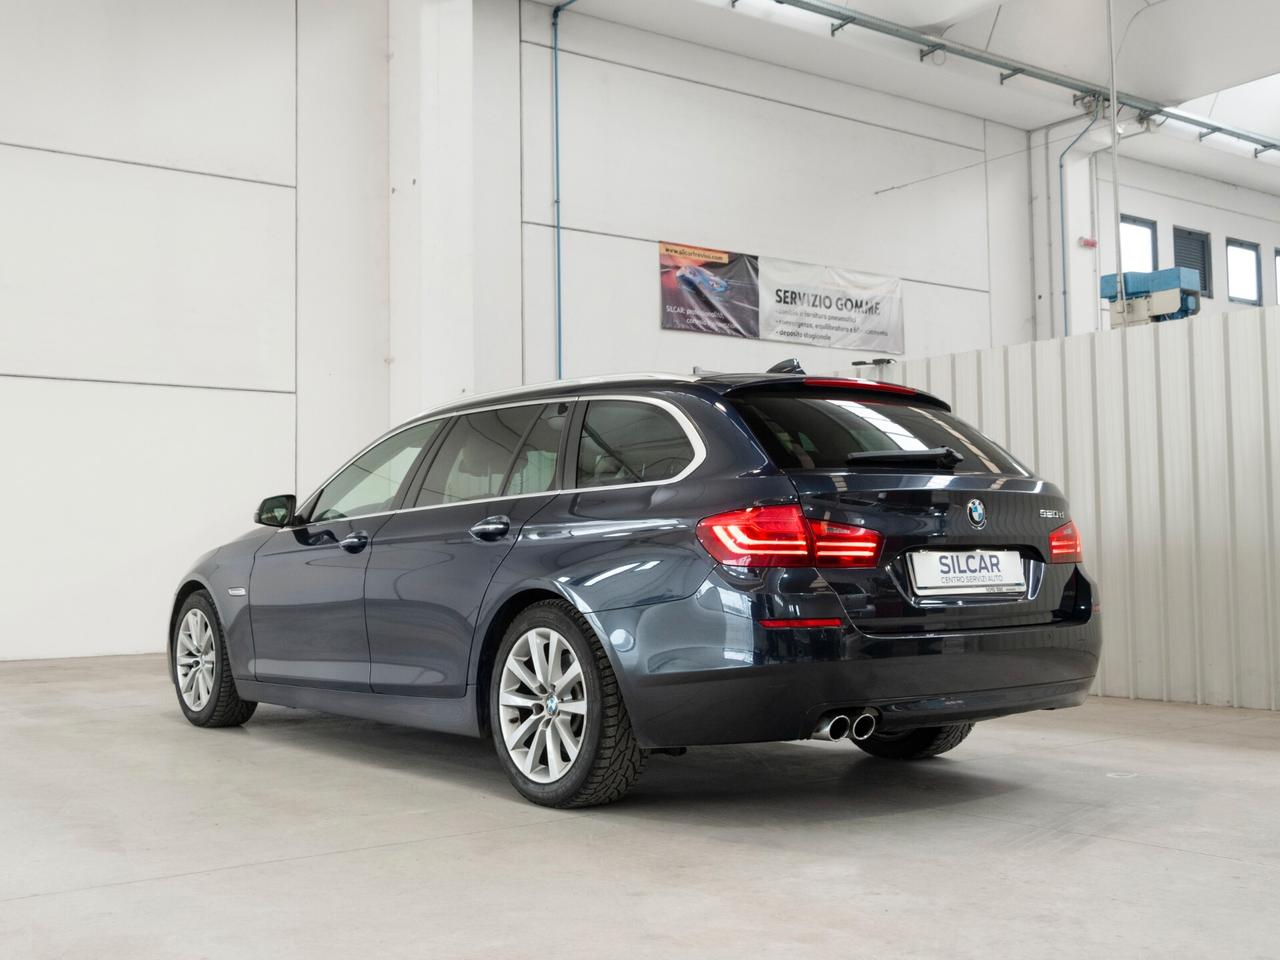 Bmw 520d Touring Business Automatica